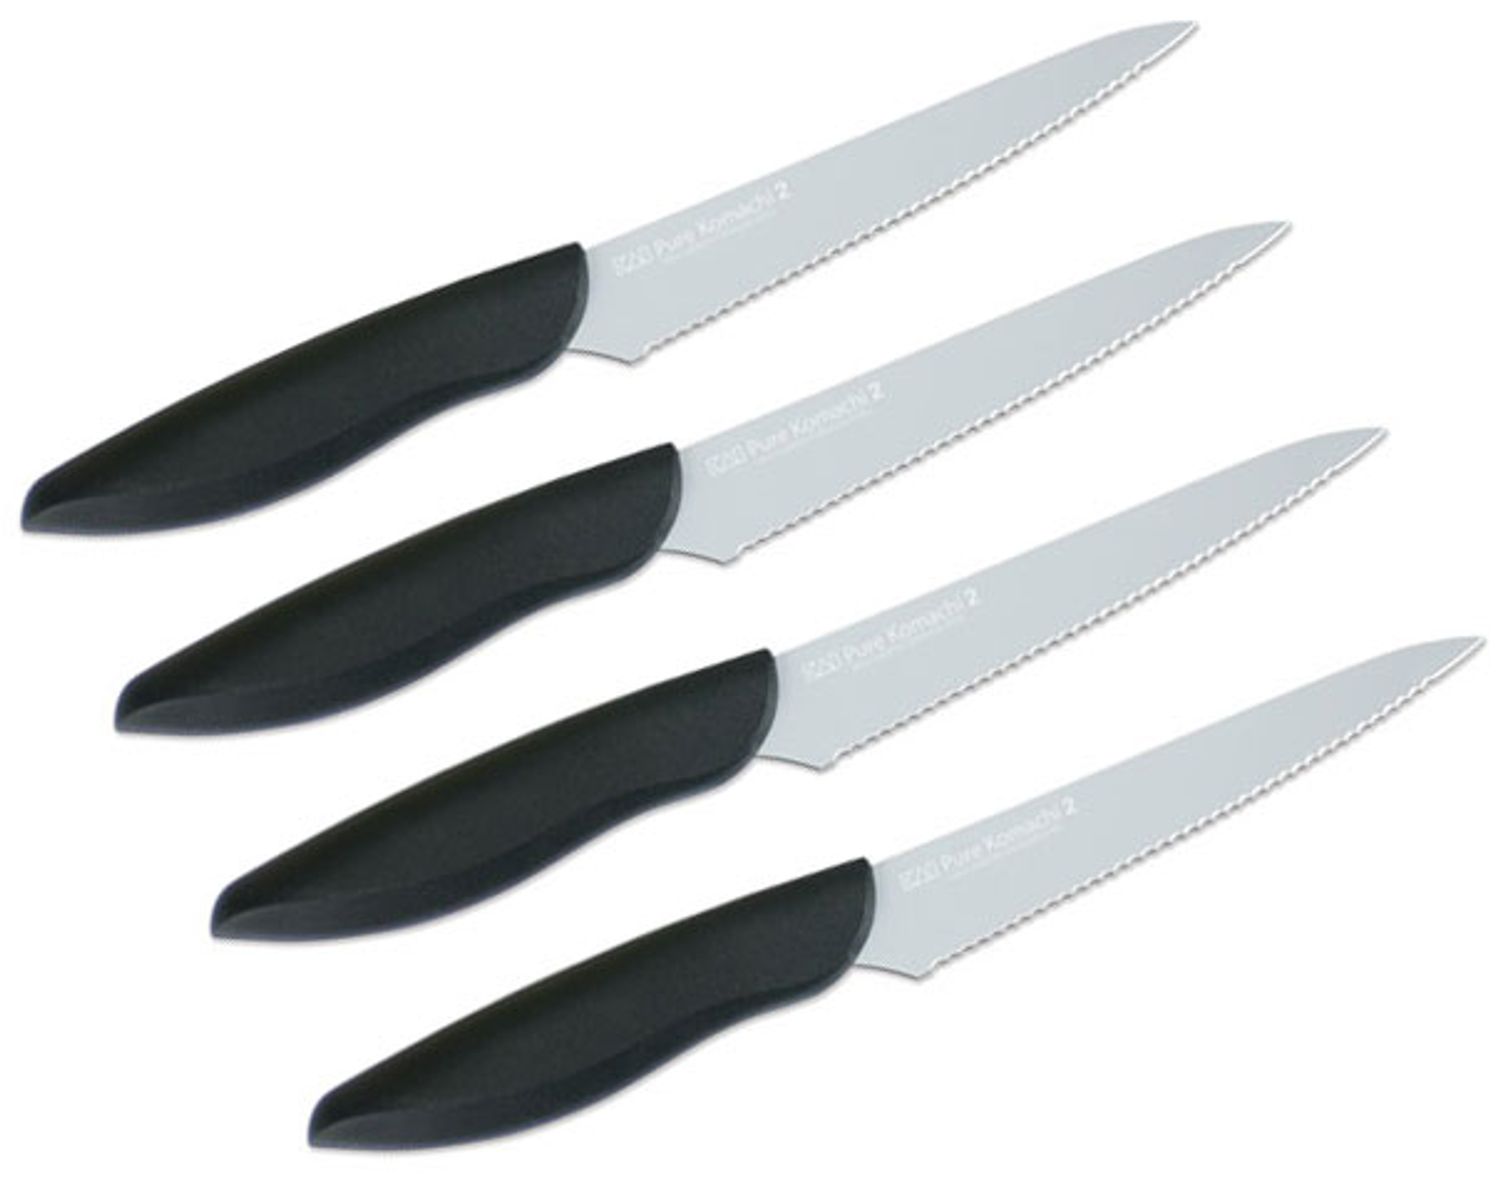 Pure Komachi 2 6-Piece Knife Set 6 Stainless Steel Knives Colored